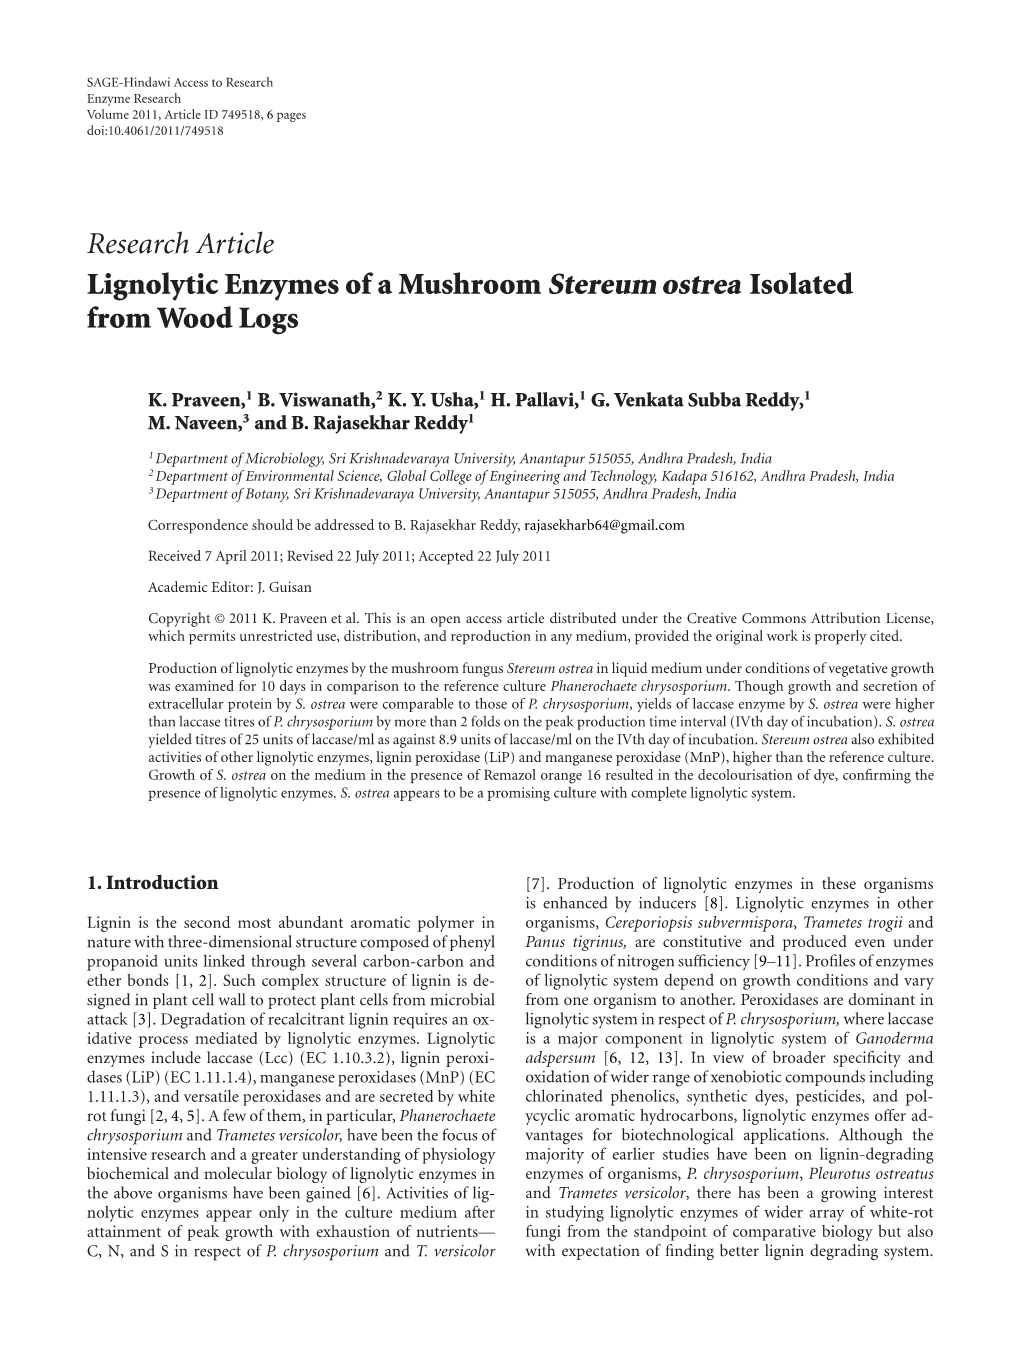 Research Article Lignolytic Enzymes of a Mushroom Stereum Ostrea Isolated from Wood Logs